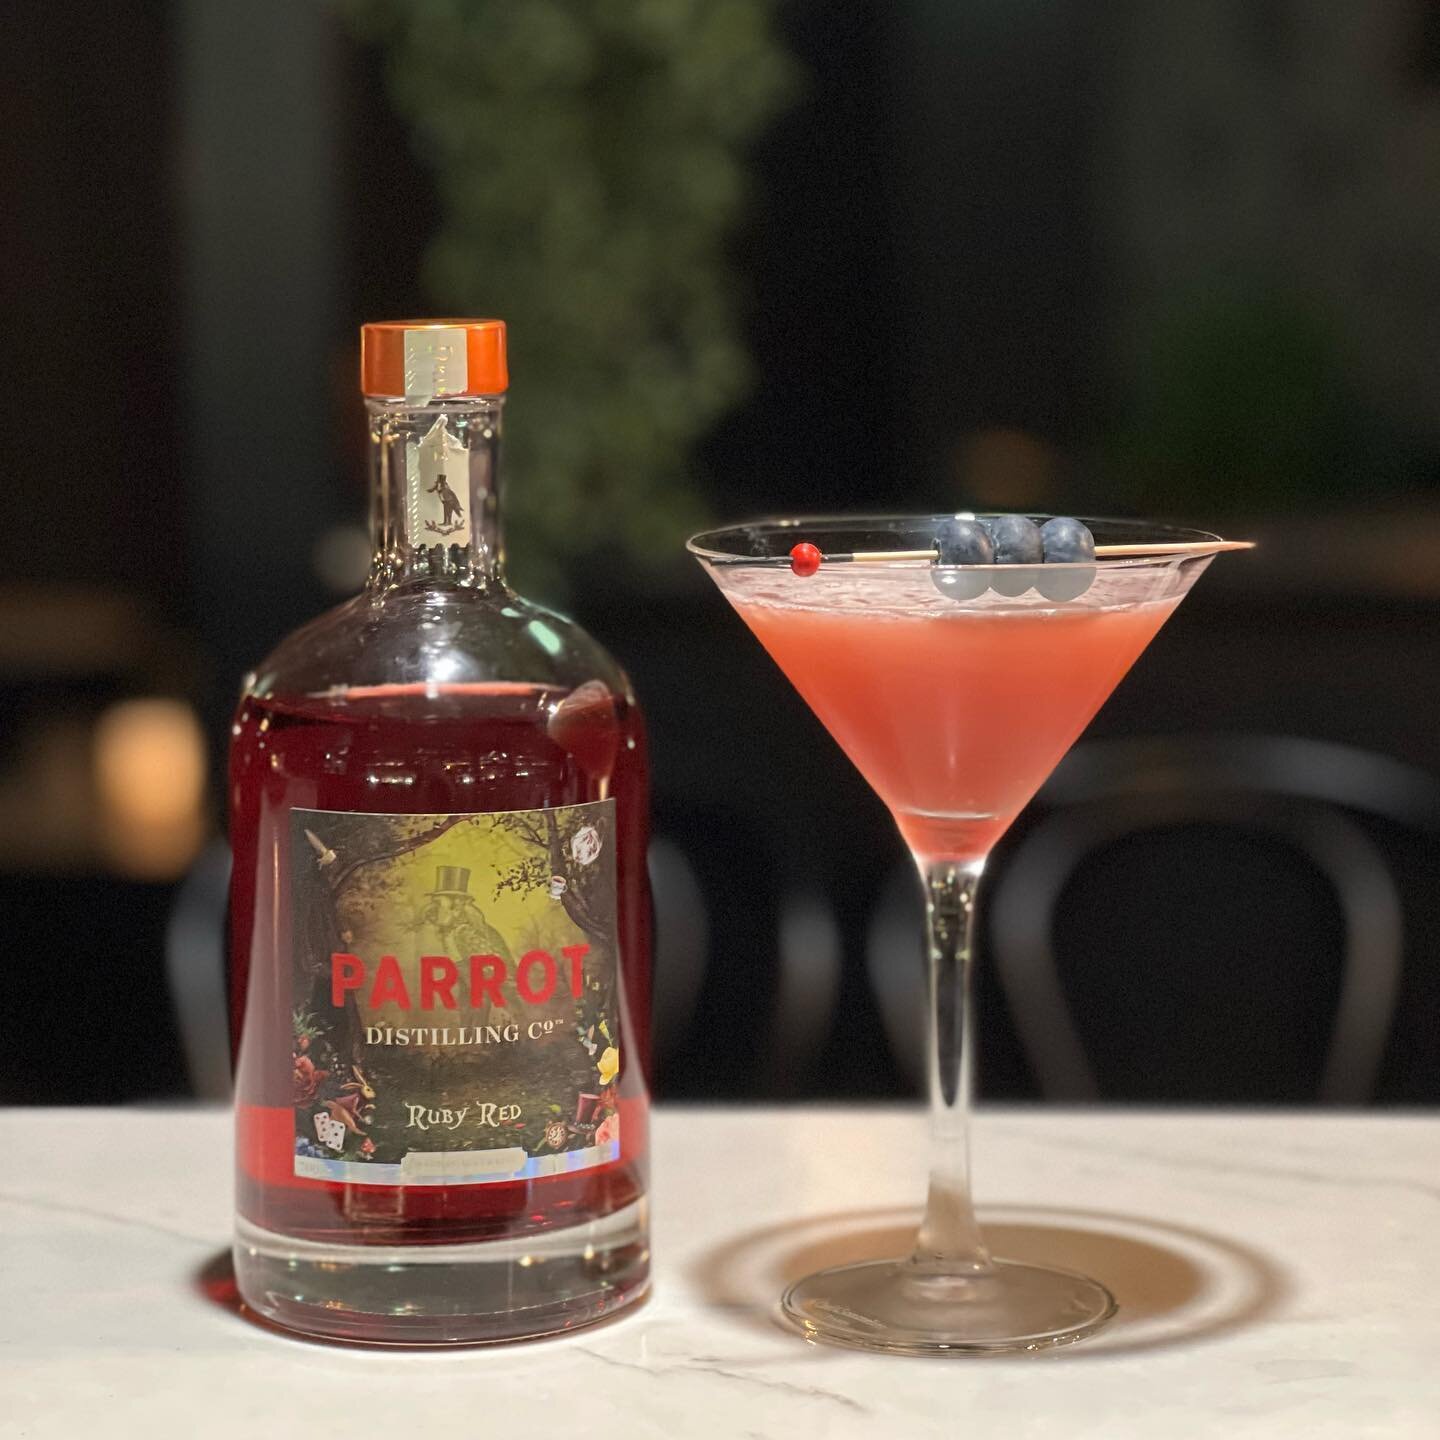 When true friends are the bartenders producing gems like this

Hayley has come up with this &ldquo;Mystic Potion&rdquo; using @parrotdistillingco Ruby Red Gin featuring notes of hibiscus, strawberry &amp; a hint of rose hoo blended with blueberry, le